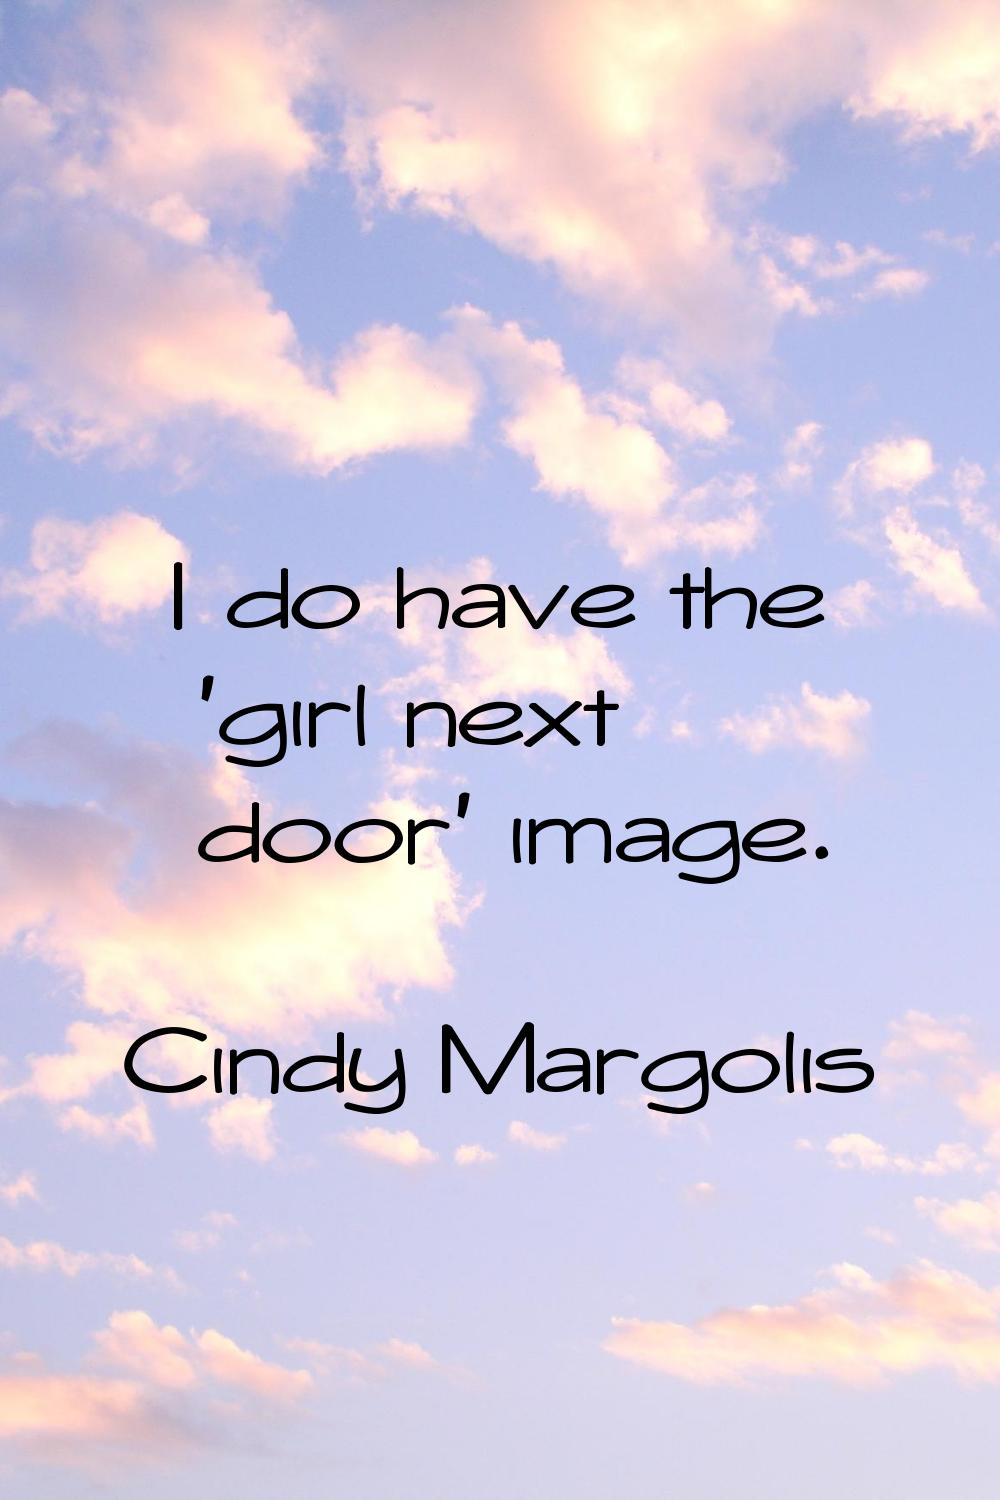 I do have the 'girl next door' image.